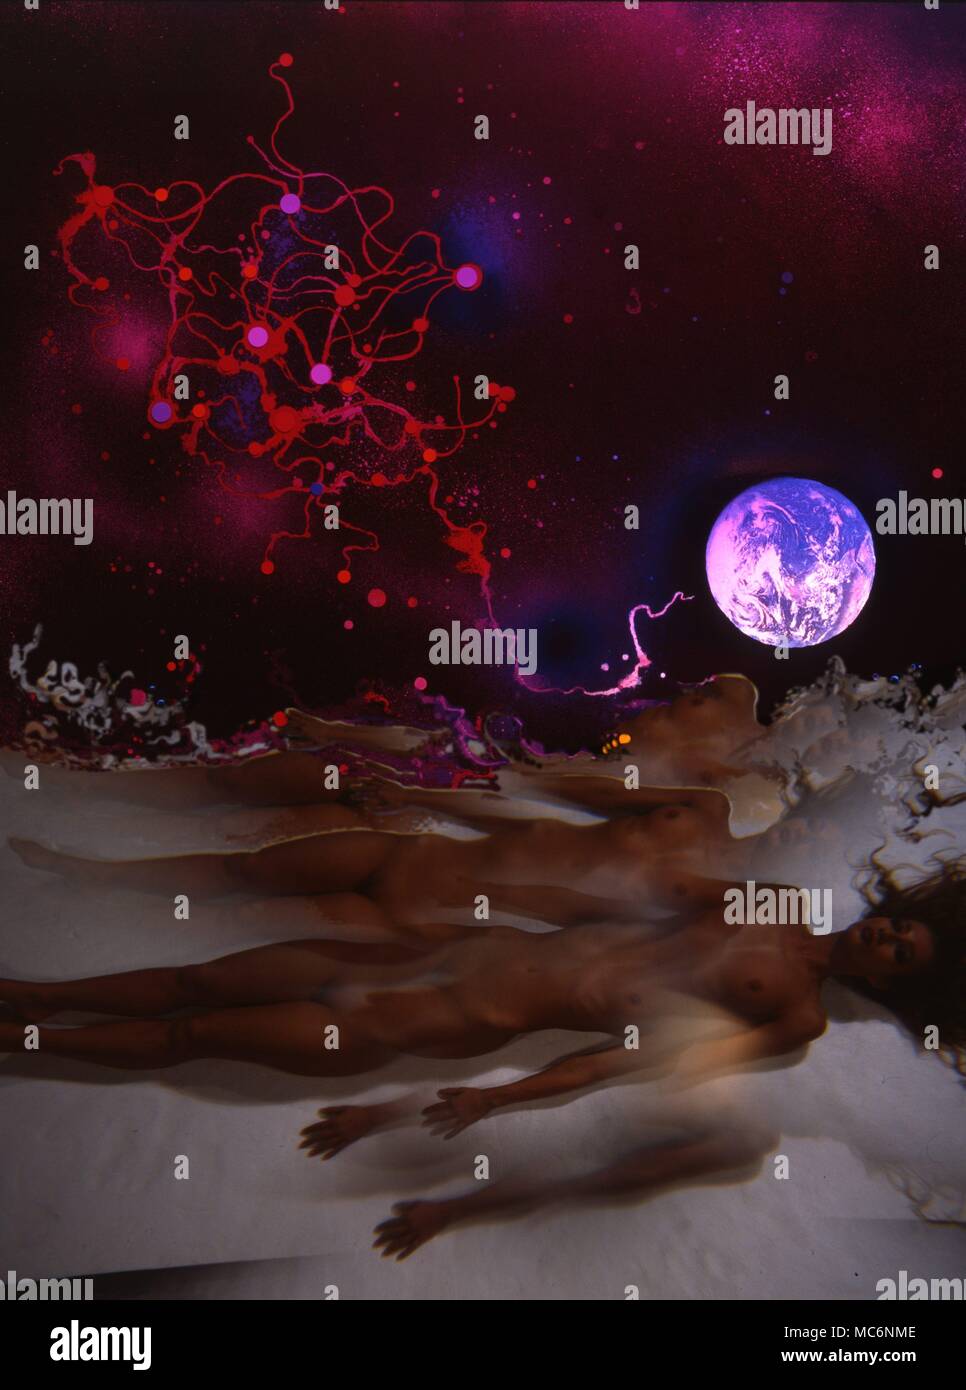 ASTRAL - DREAMS - SLEEP - Image of the body during sleep, floating in the astral world Occult view of the experience of the astral world during sleep, with the physical body separated from the astral body, which is free to return to its own domain. Stock Photo